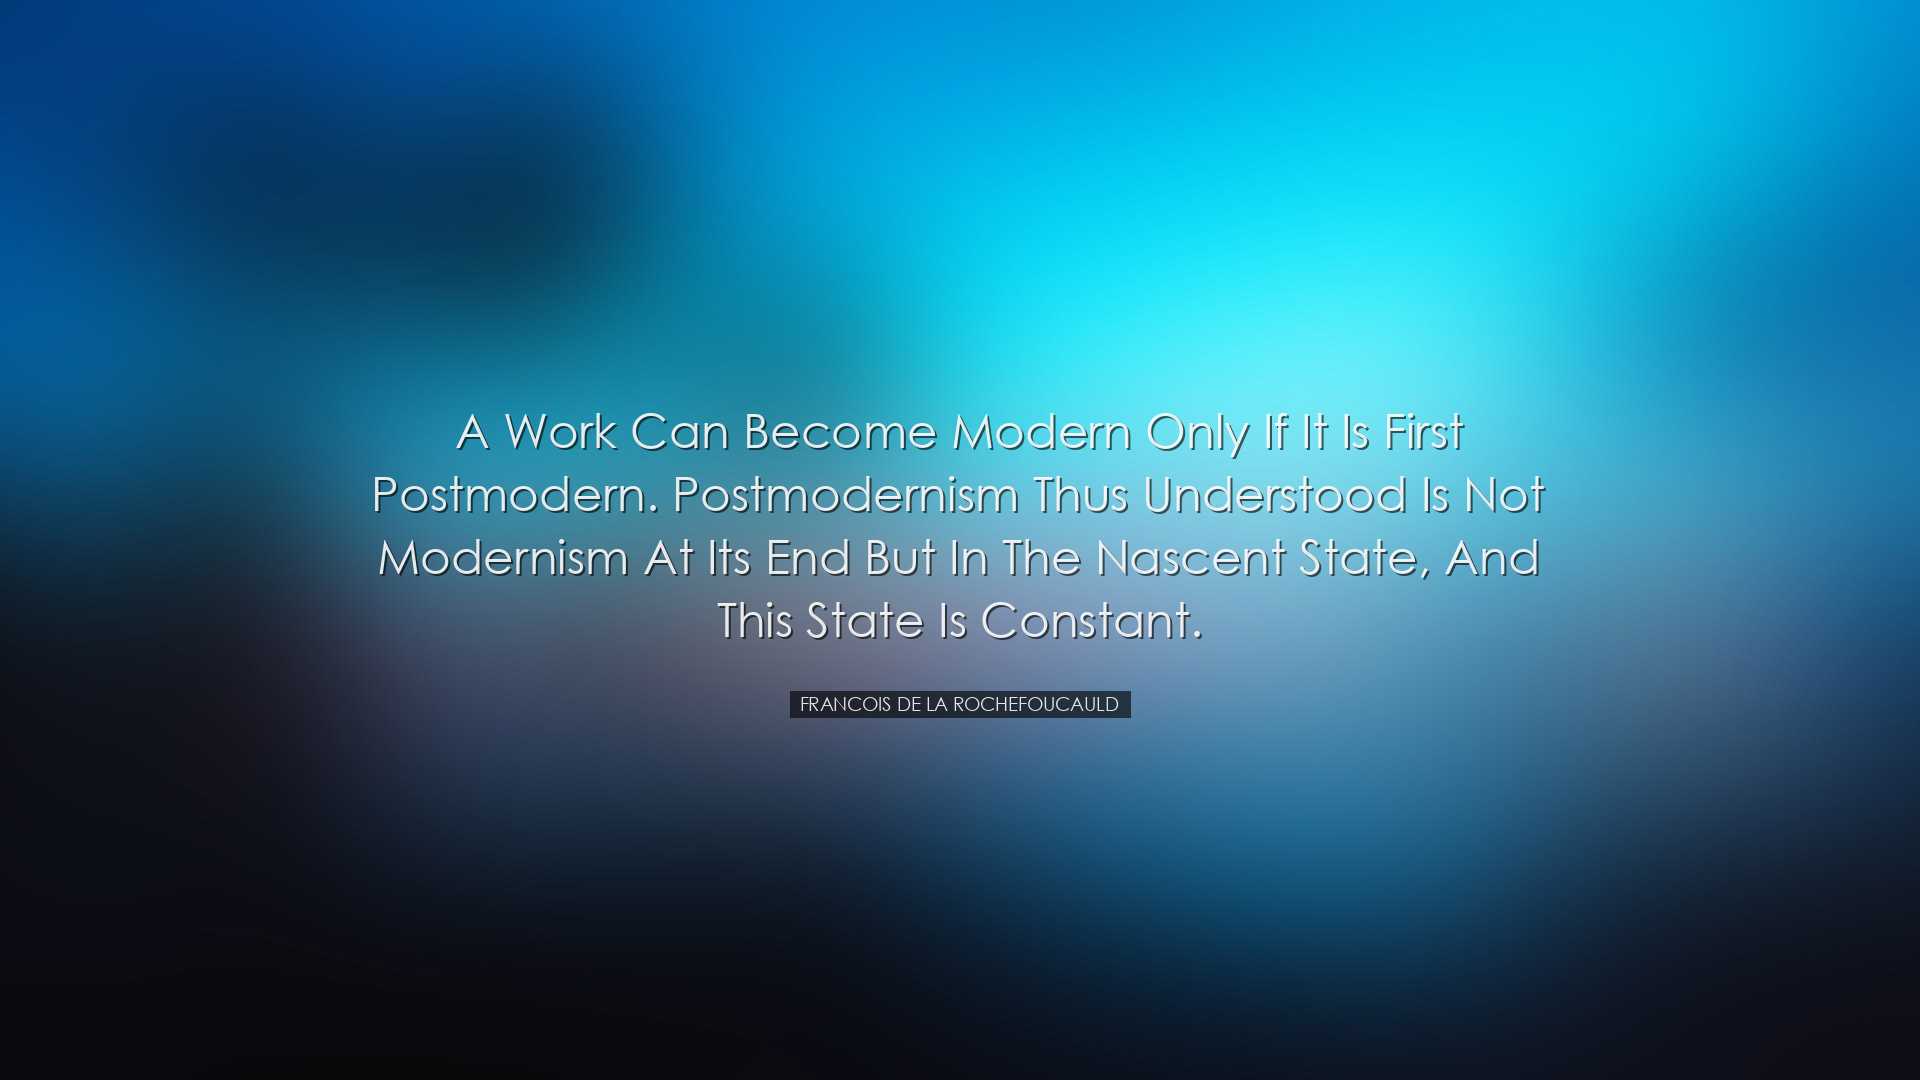 A work can become modern only if it is first postmodern. Postmoder